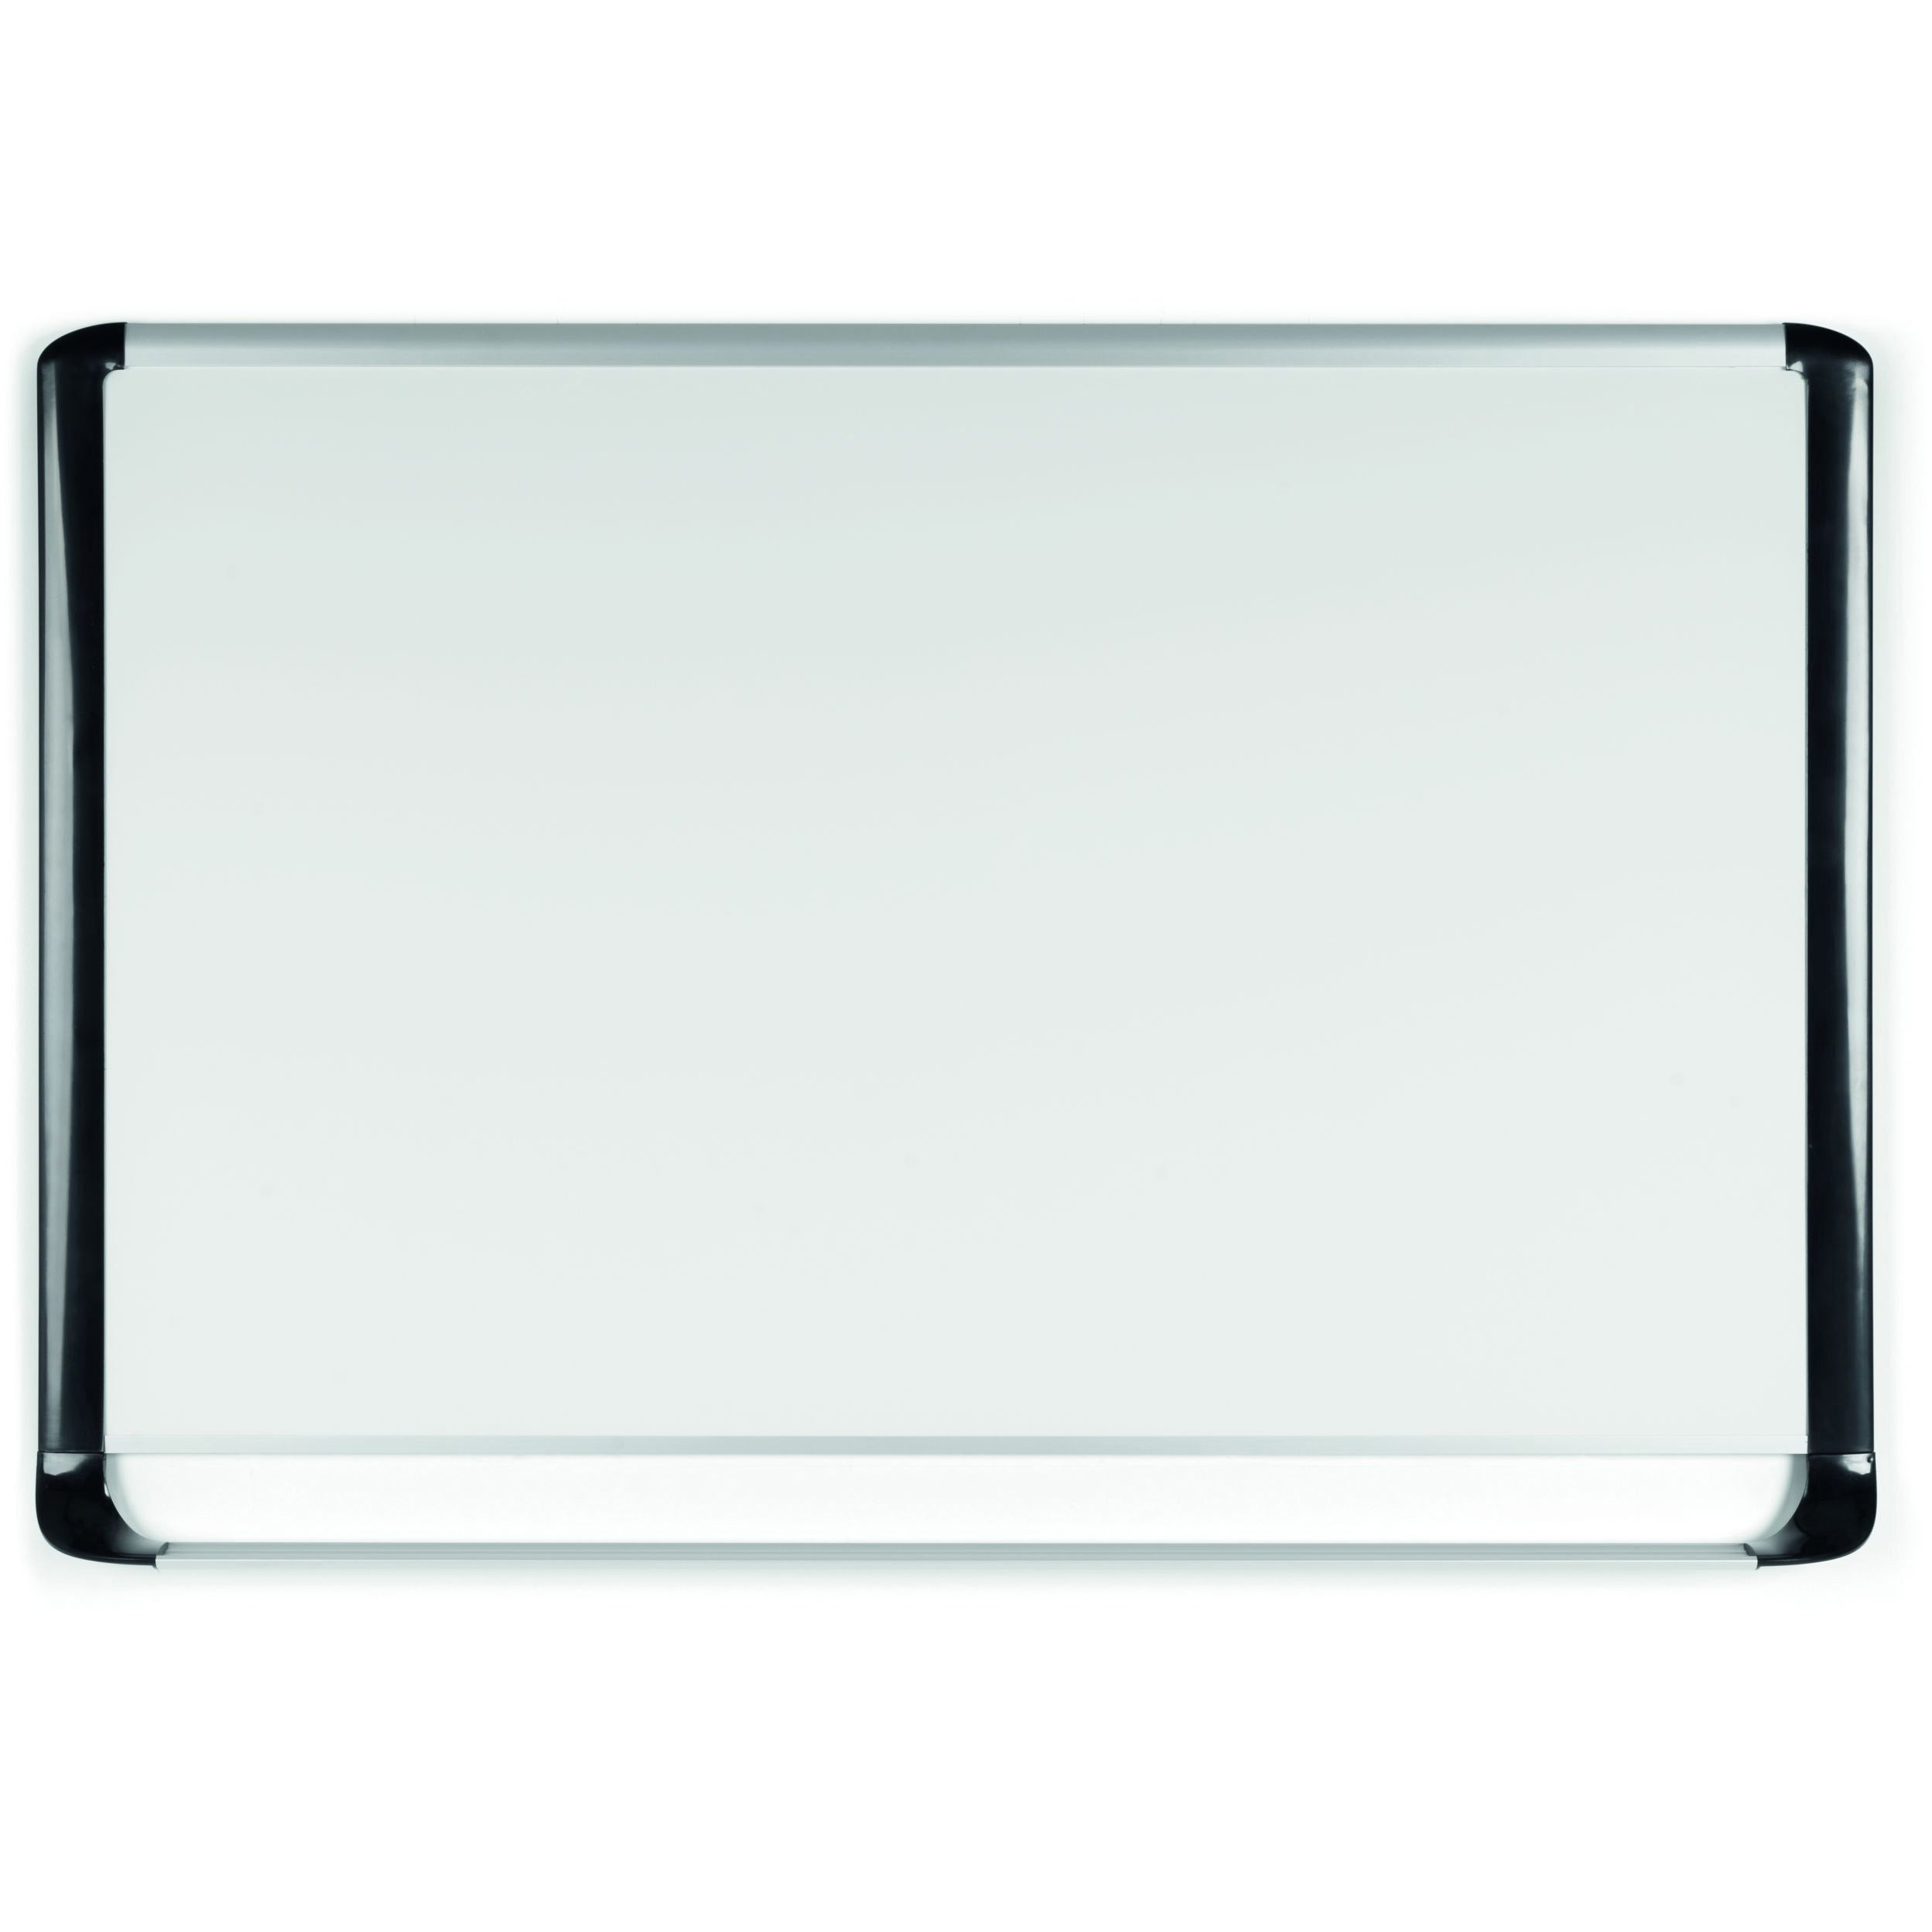 MVI050401 MVI Series Magnetic Porcelain Dry Erase Board, Easy Clean, Scratch Resistant Wall Mounting Whiteboard, 36" x 48", Black Frame by MasterVision